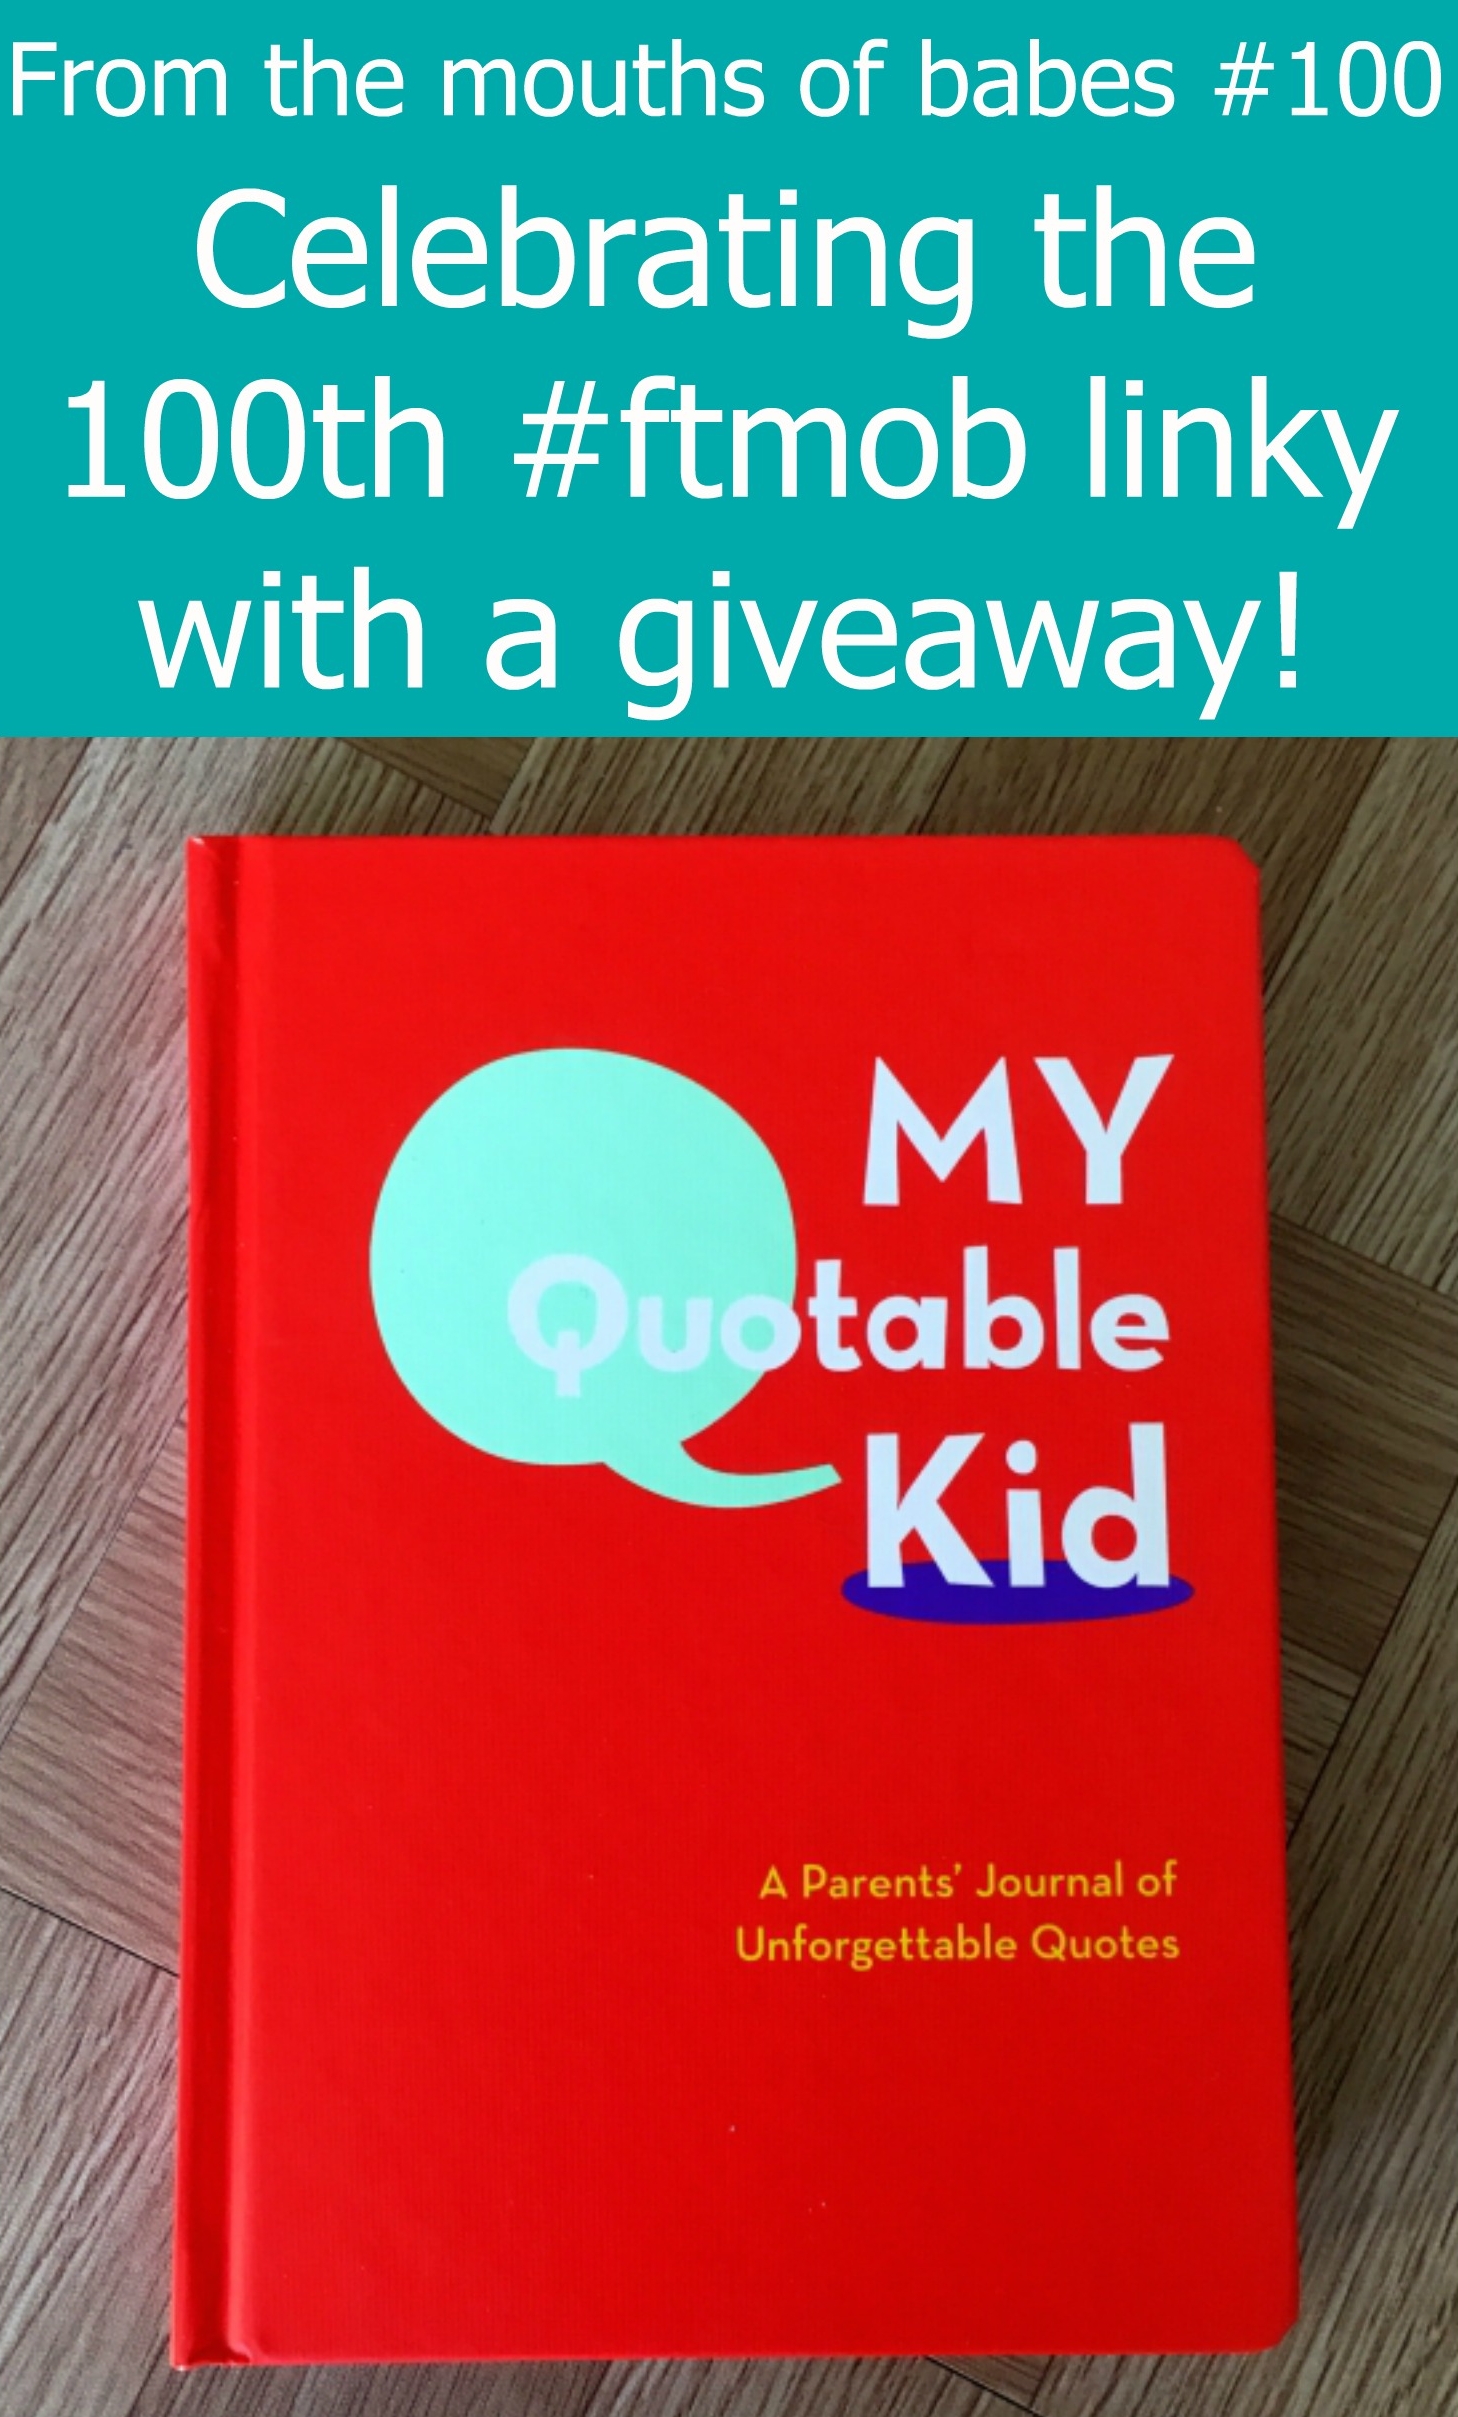 Celebrating the 100th #ftmob linky with a giveaway for a copy of "My Quotable Kid" journal